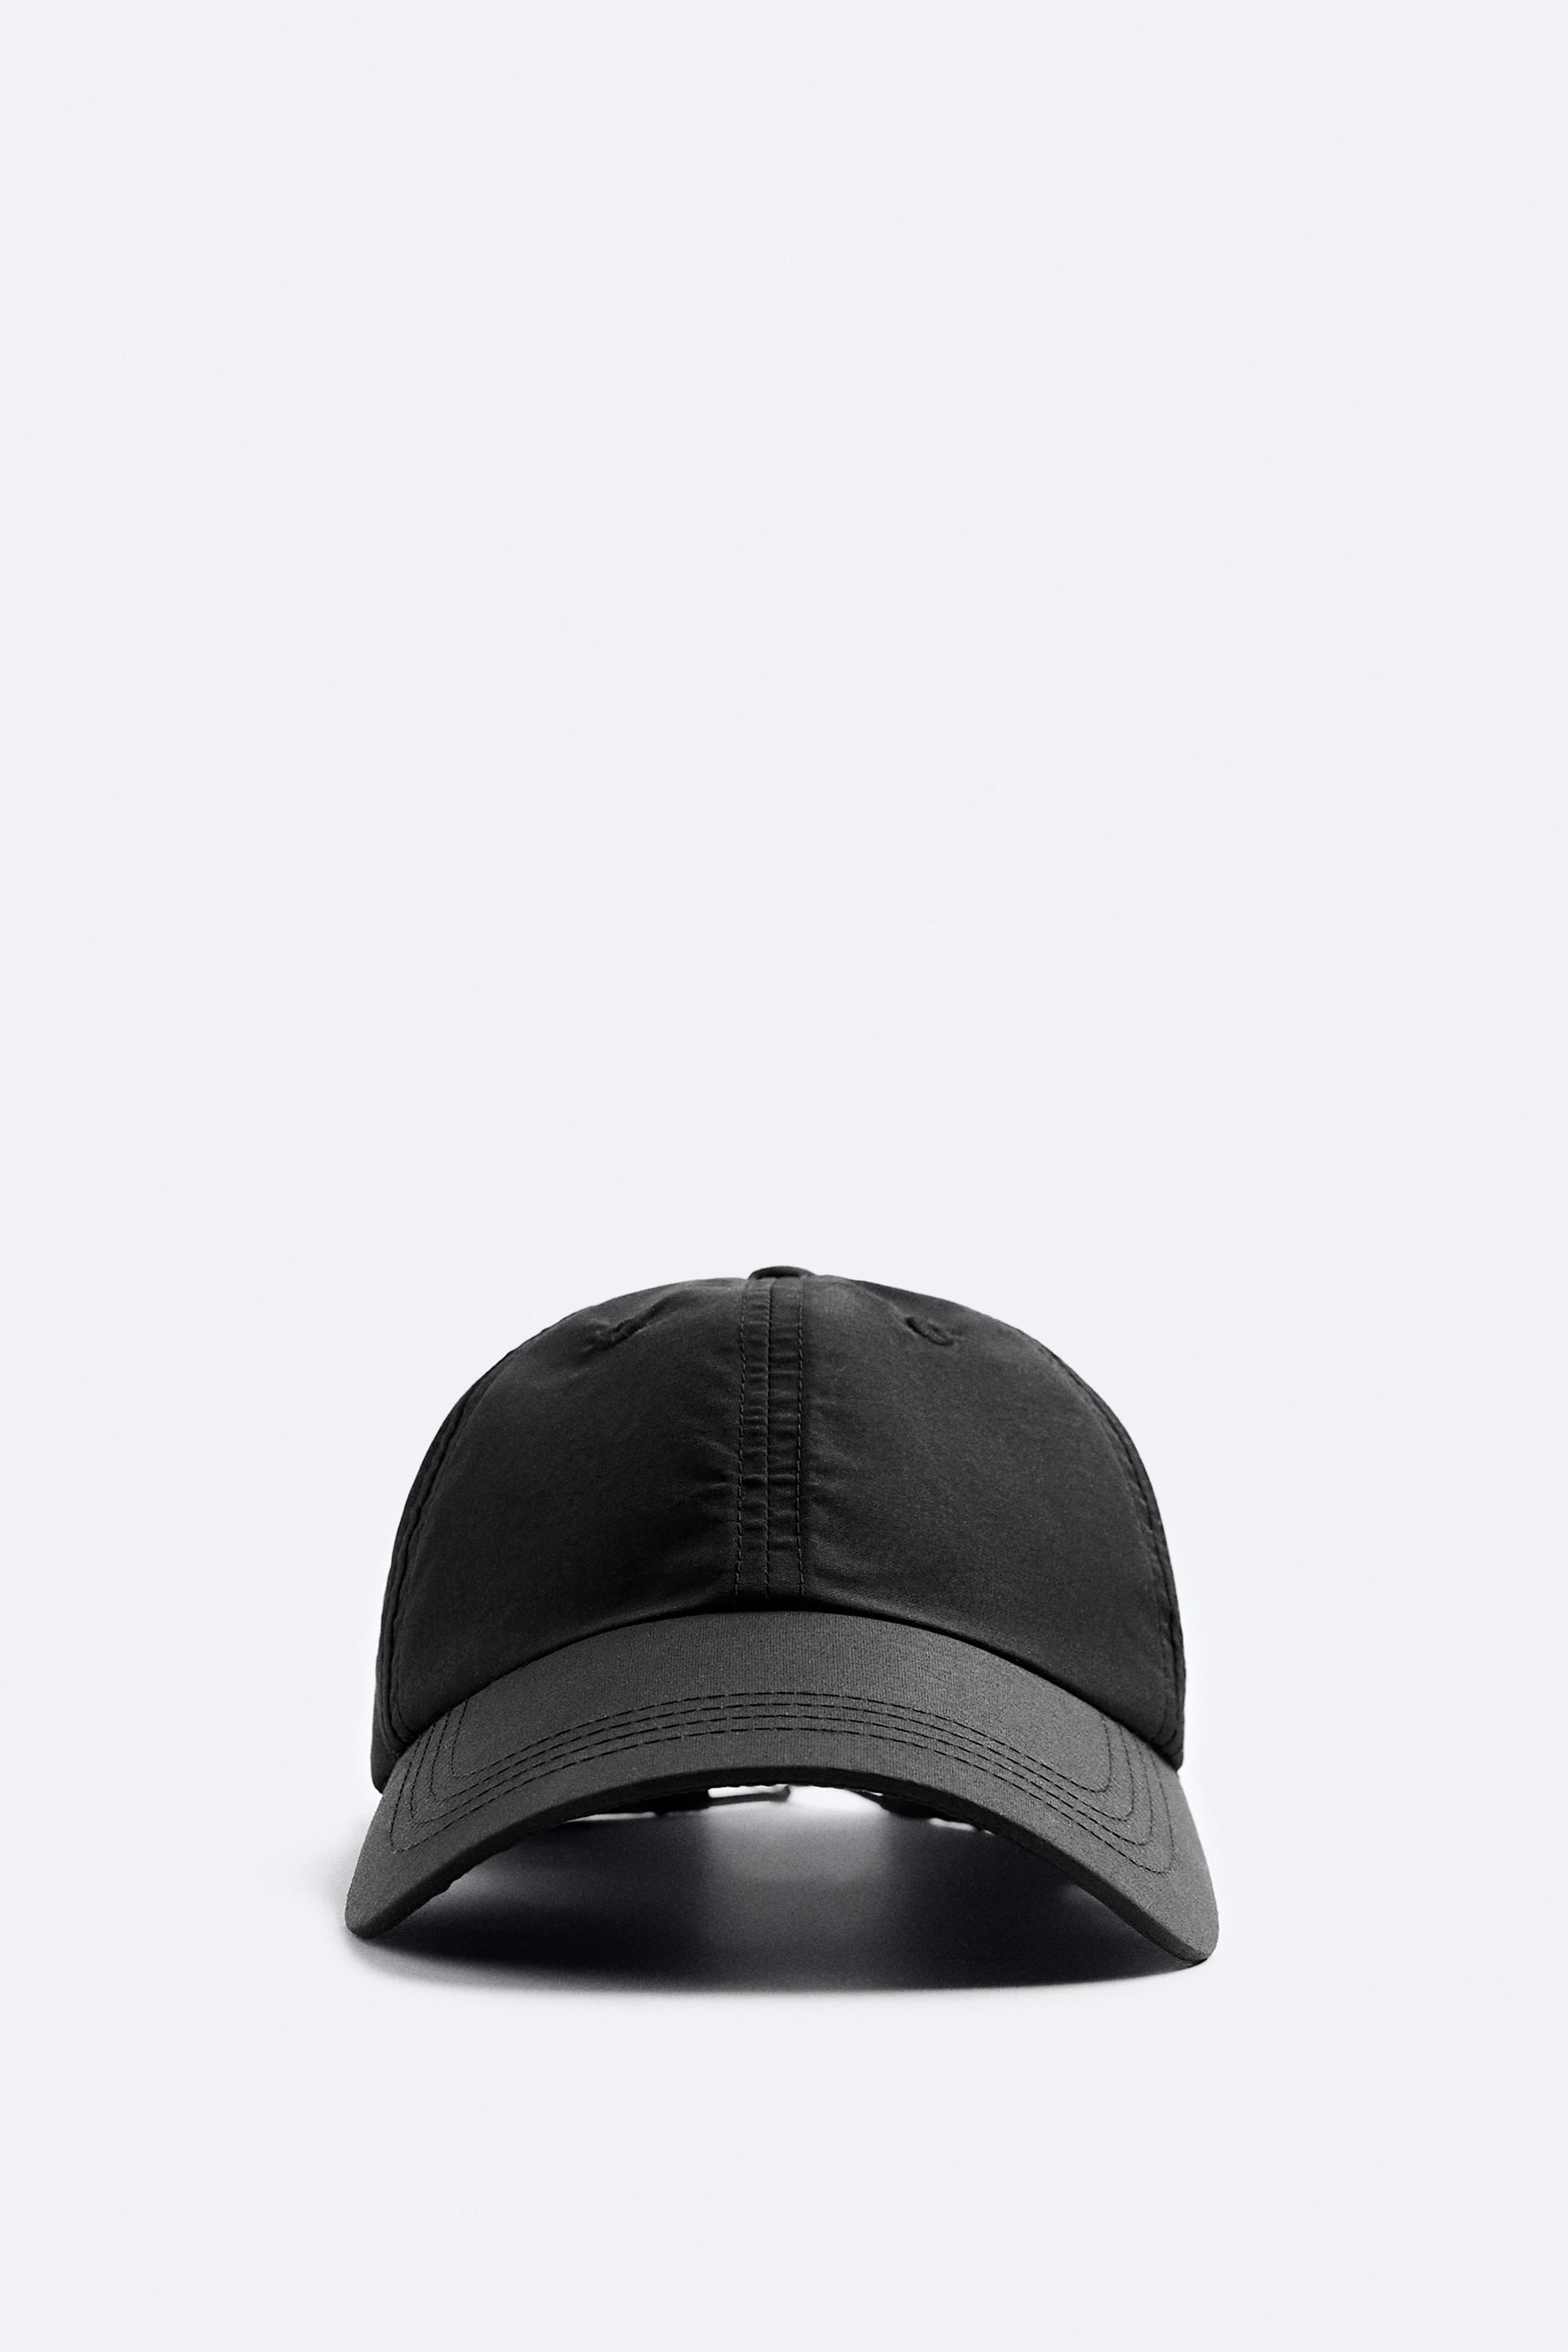 TECHNICAL CAP LIMITED EDITION - Black